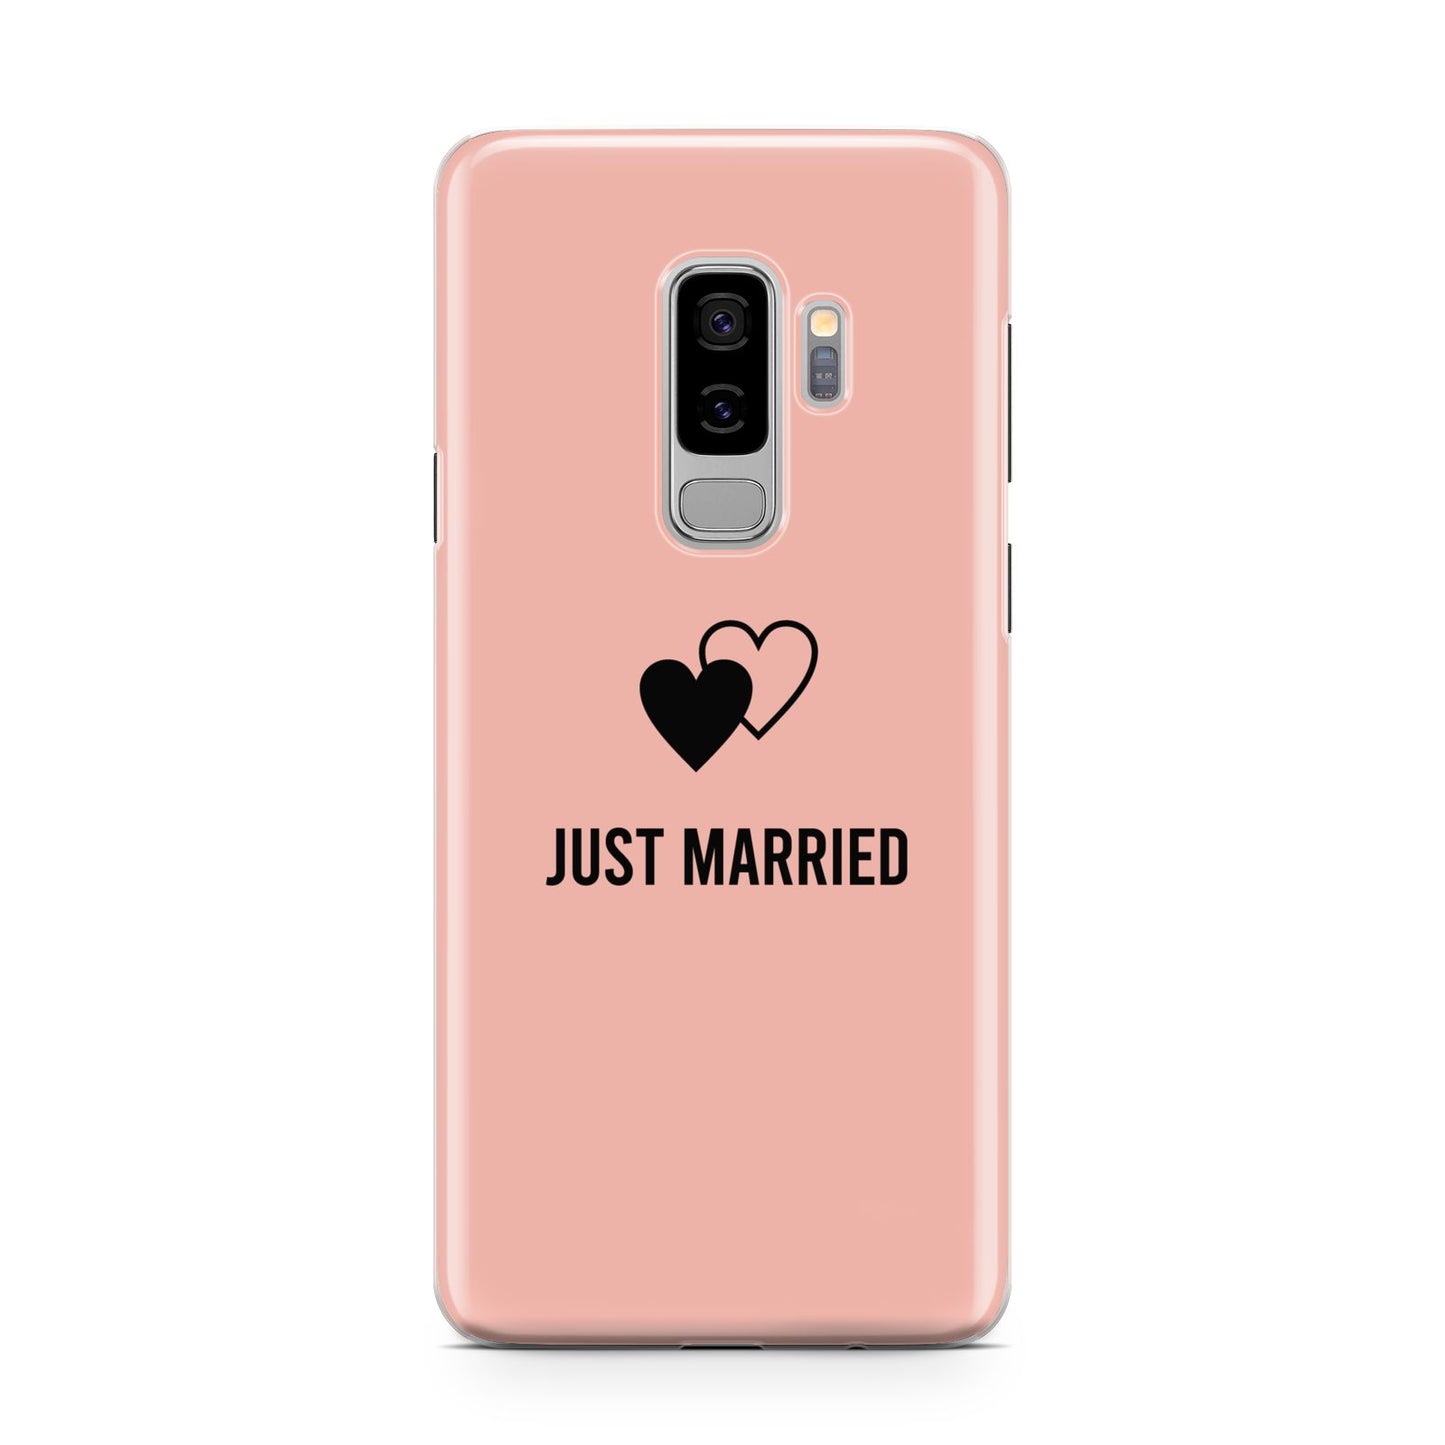 Just Married Samsung Galaxy S9 Plus Case on Silver phone